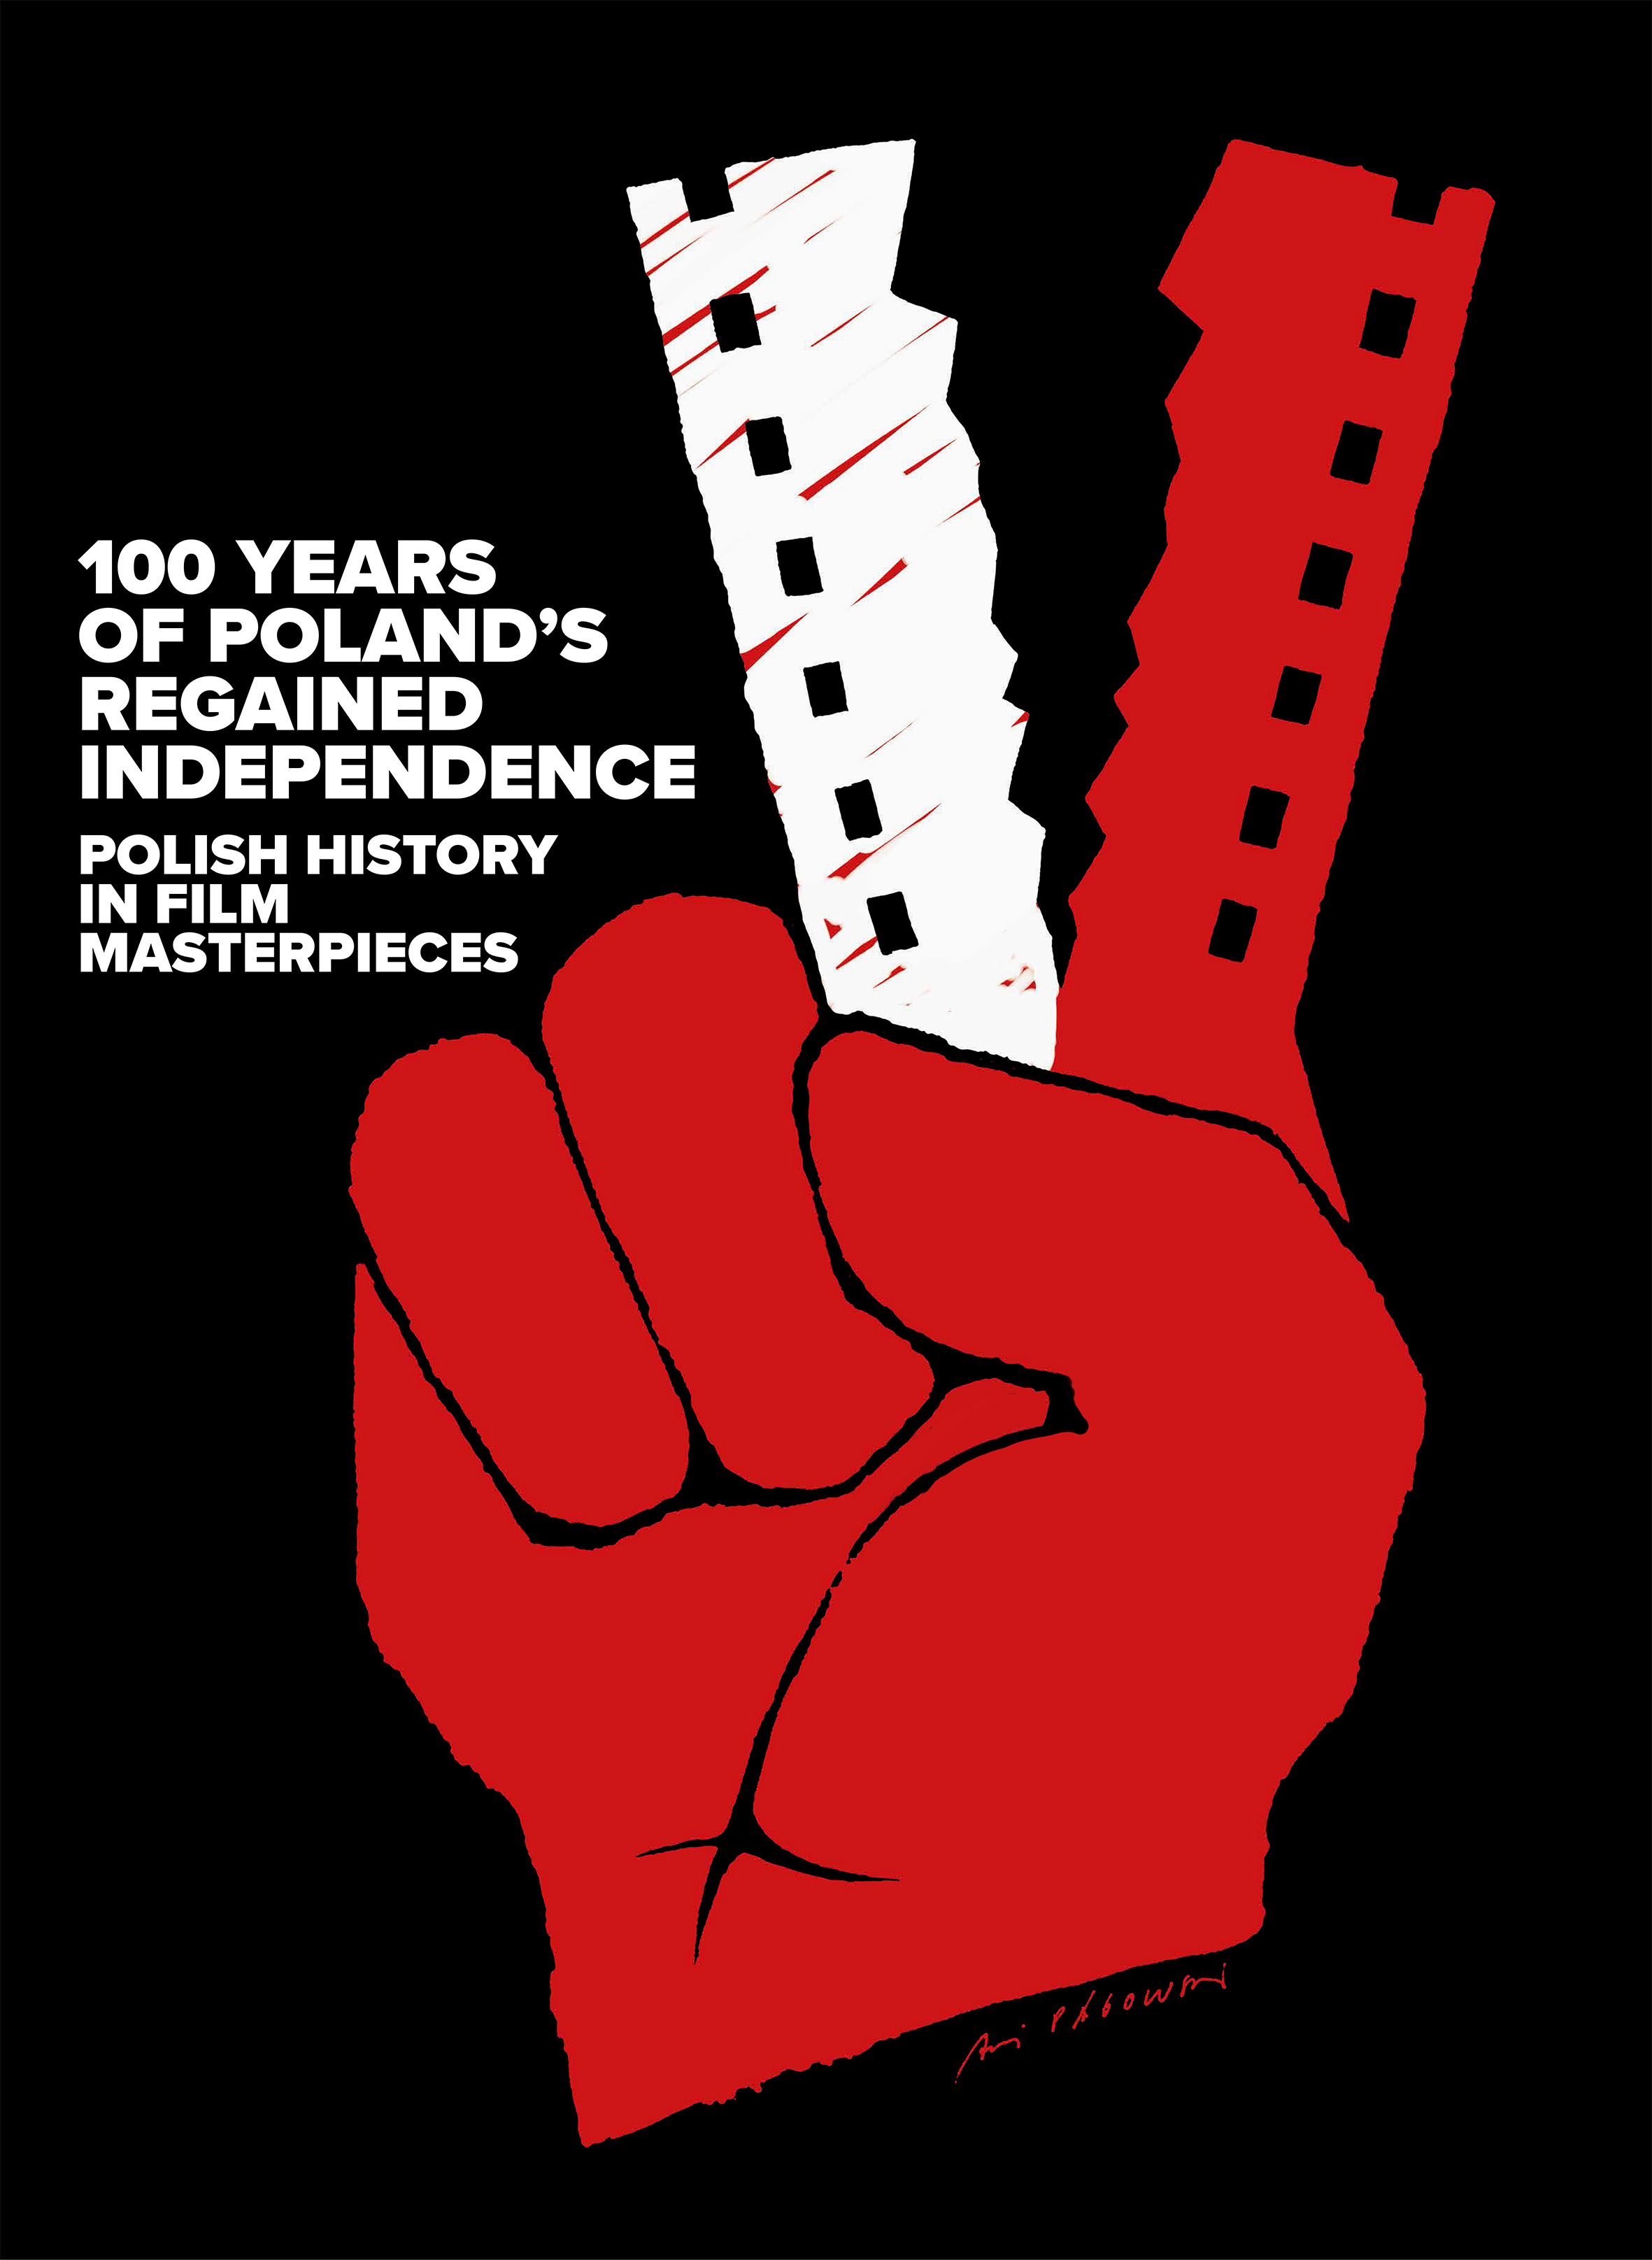 100 Years of Poland's Regained Independence 